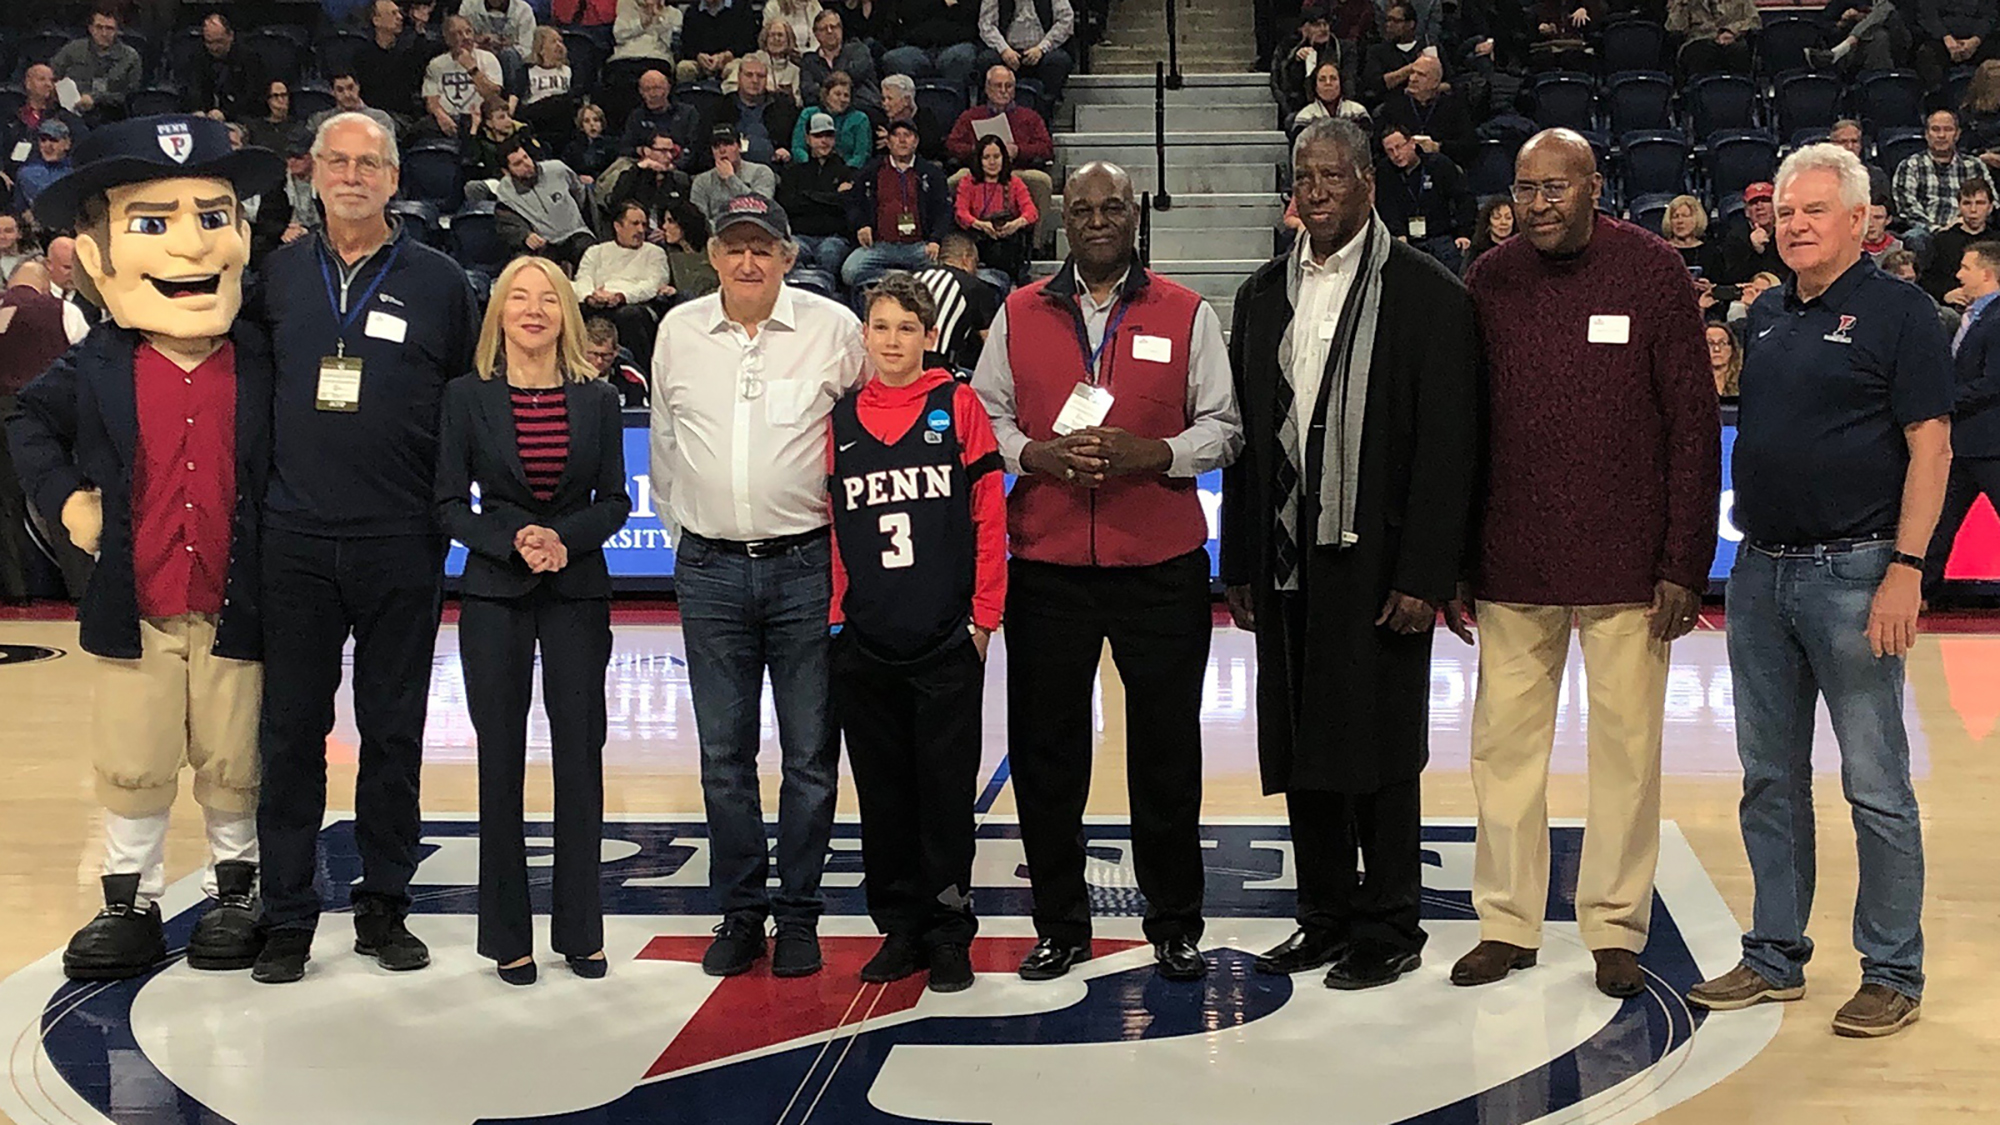 Penn President Amy Gutmann, third from left, honors Penn basketball alumni during halftime of the Dartmouth game.